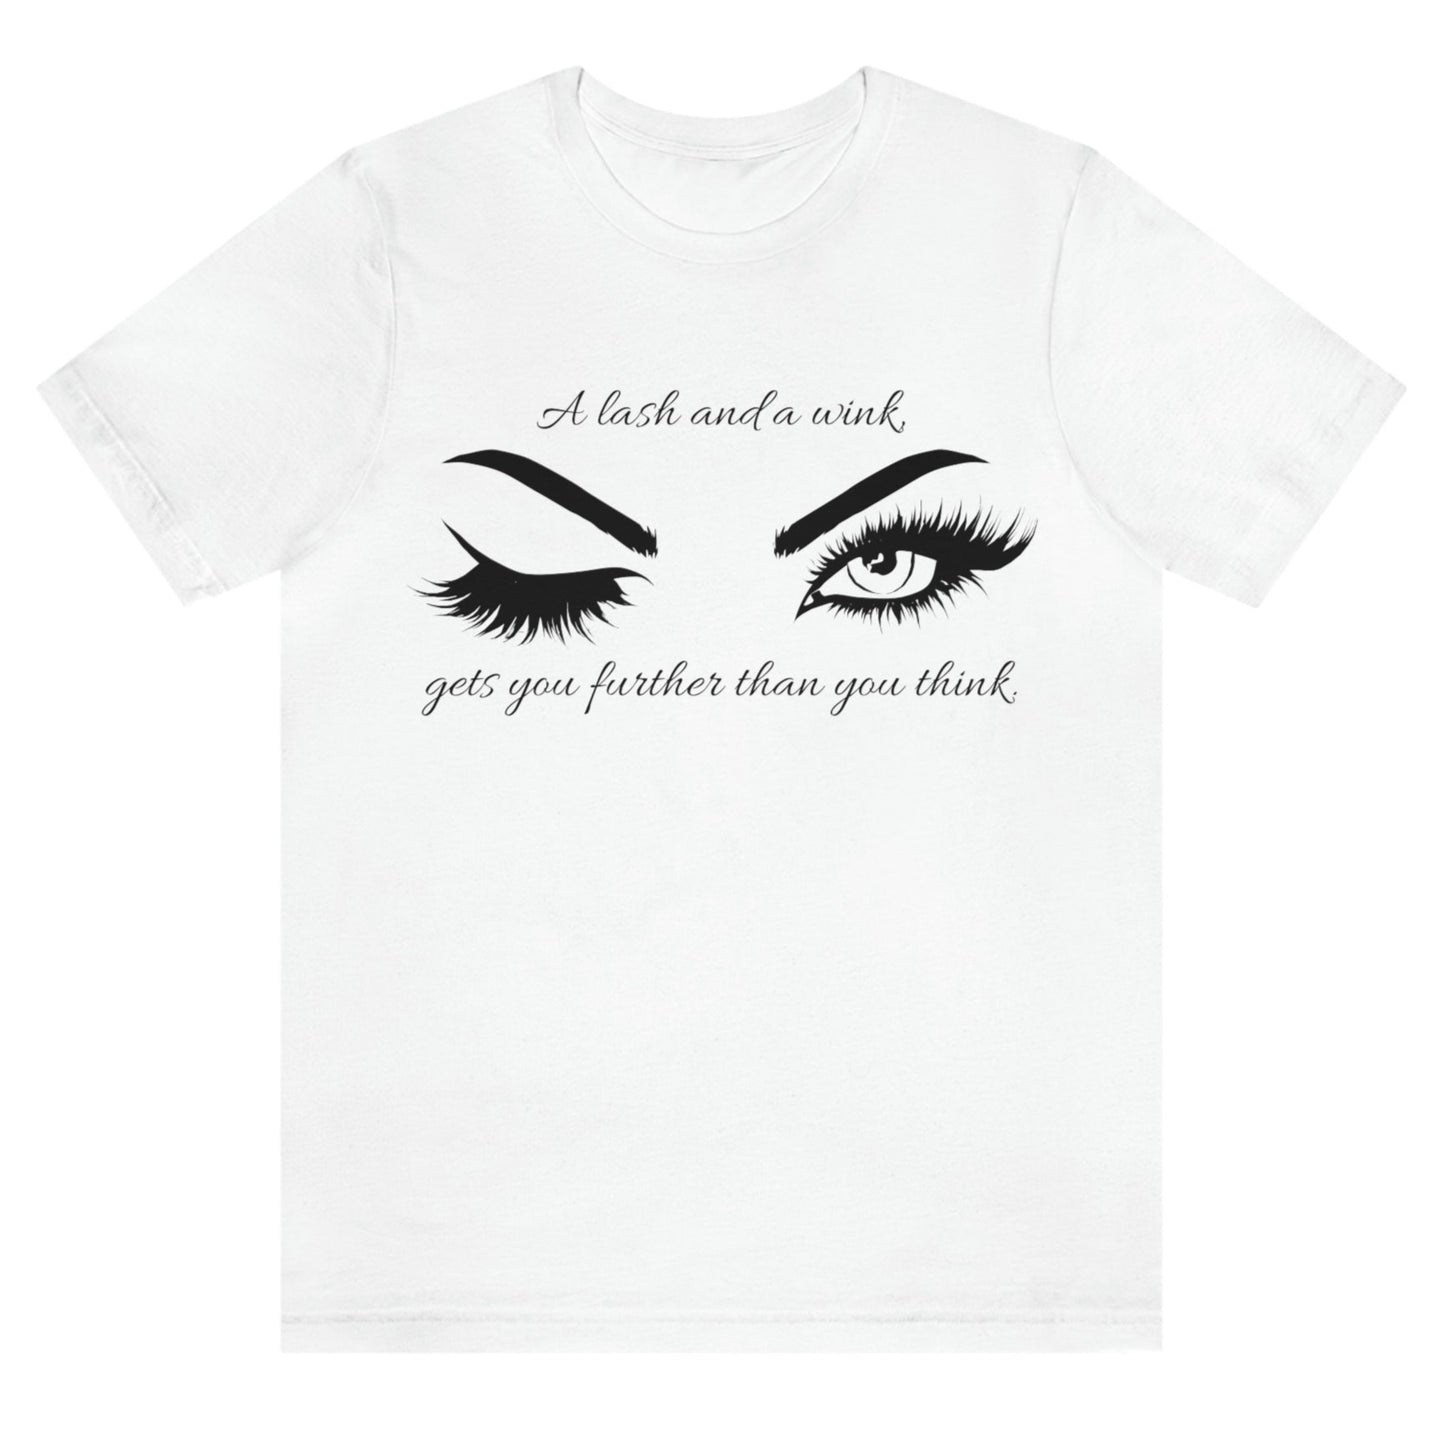 a-lash-and-a-wink-gets-you-further-than-you-think-white-t-shirt-womens-lashes